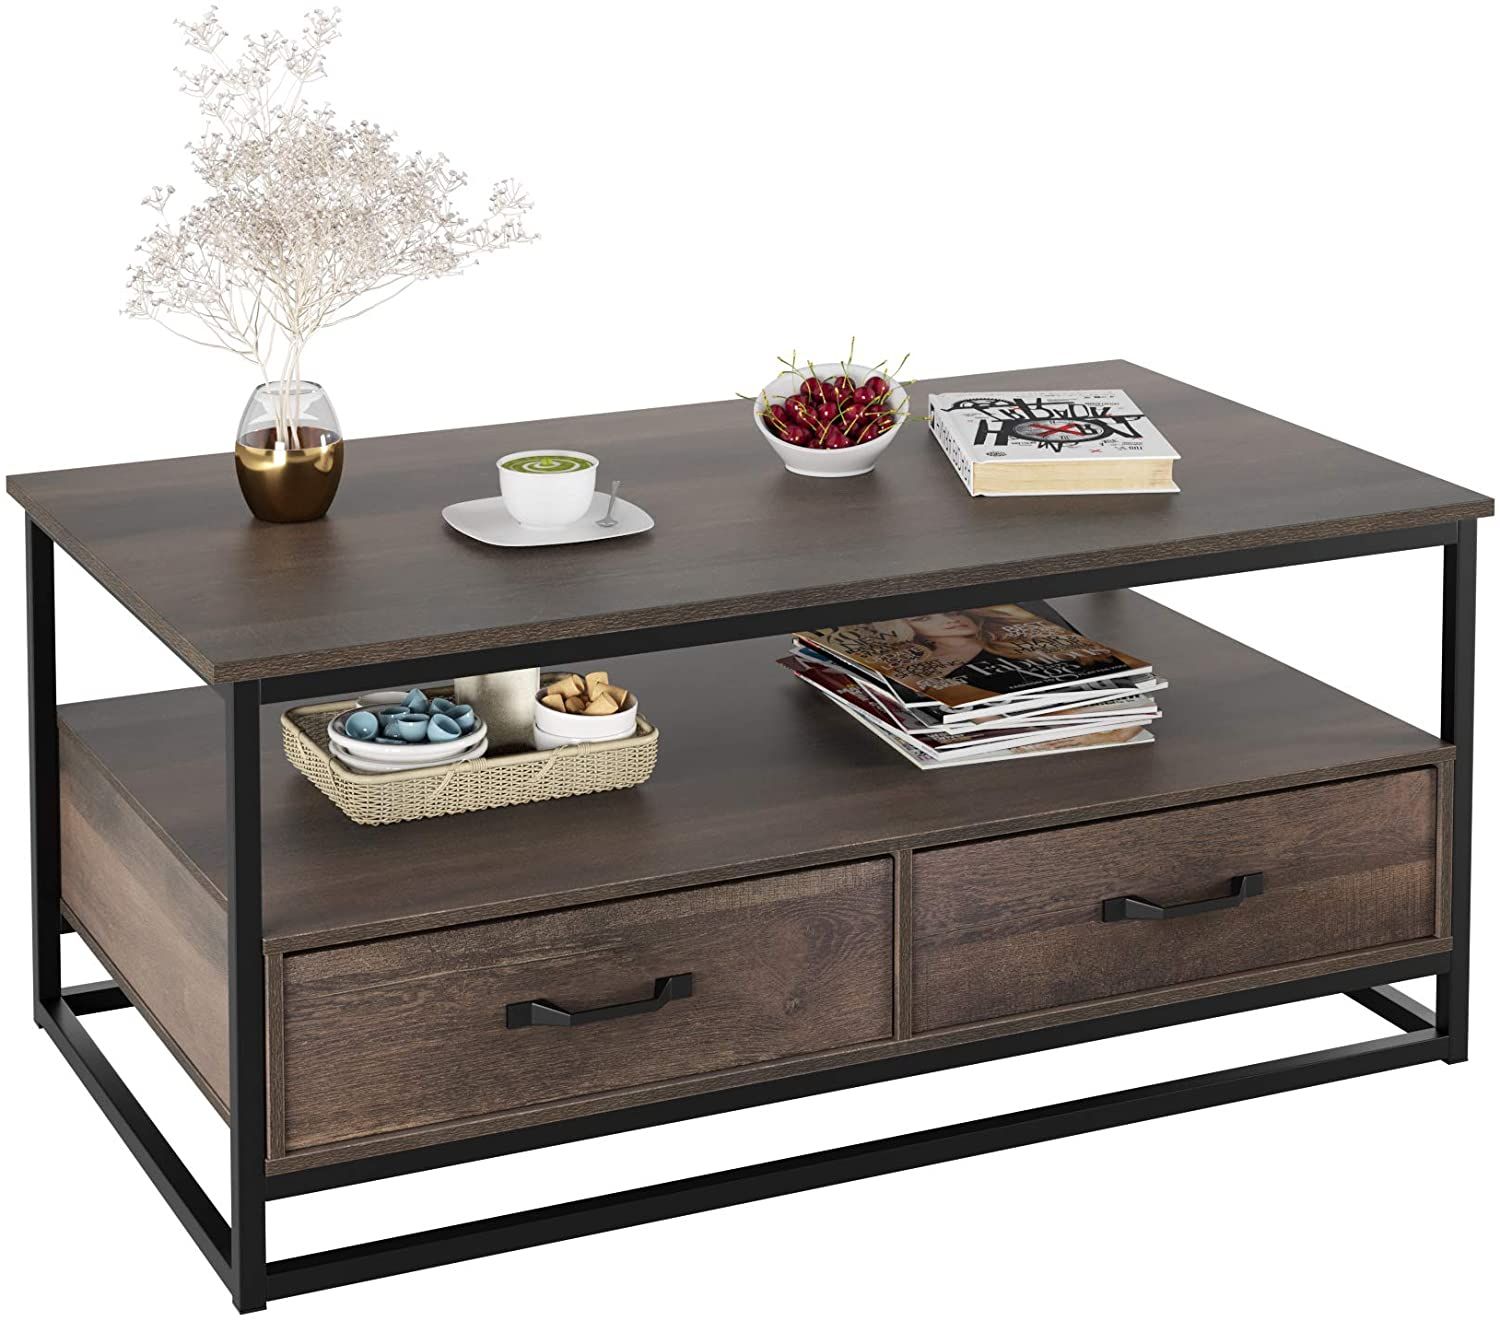 Homfa Coffee Table For Living Room, 43"" Wooden Cocktail Table With Storage  Shelf And 2 Drawers, Rustic Center Table For Home Office, Dark Brown –  Walmart Inside 2 Drawer Coffee Tables (View 14 of 15)